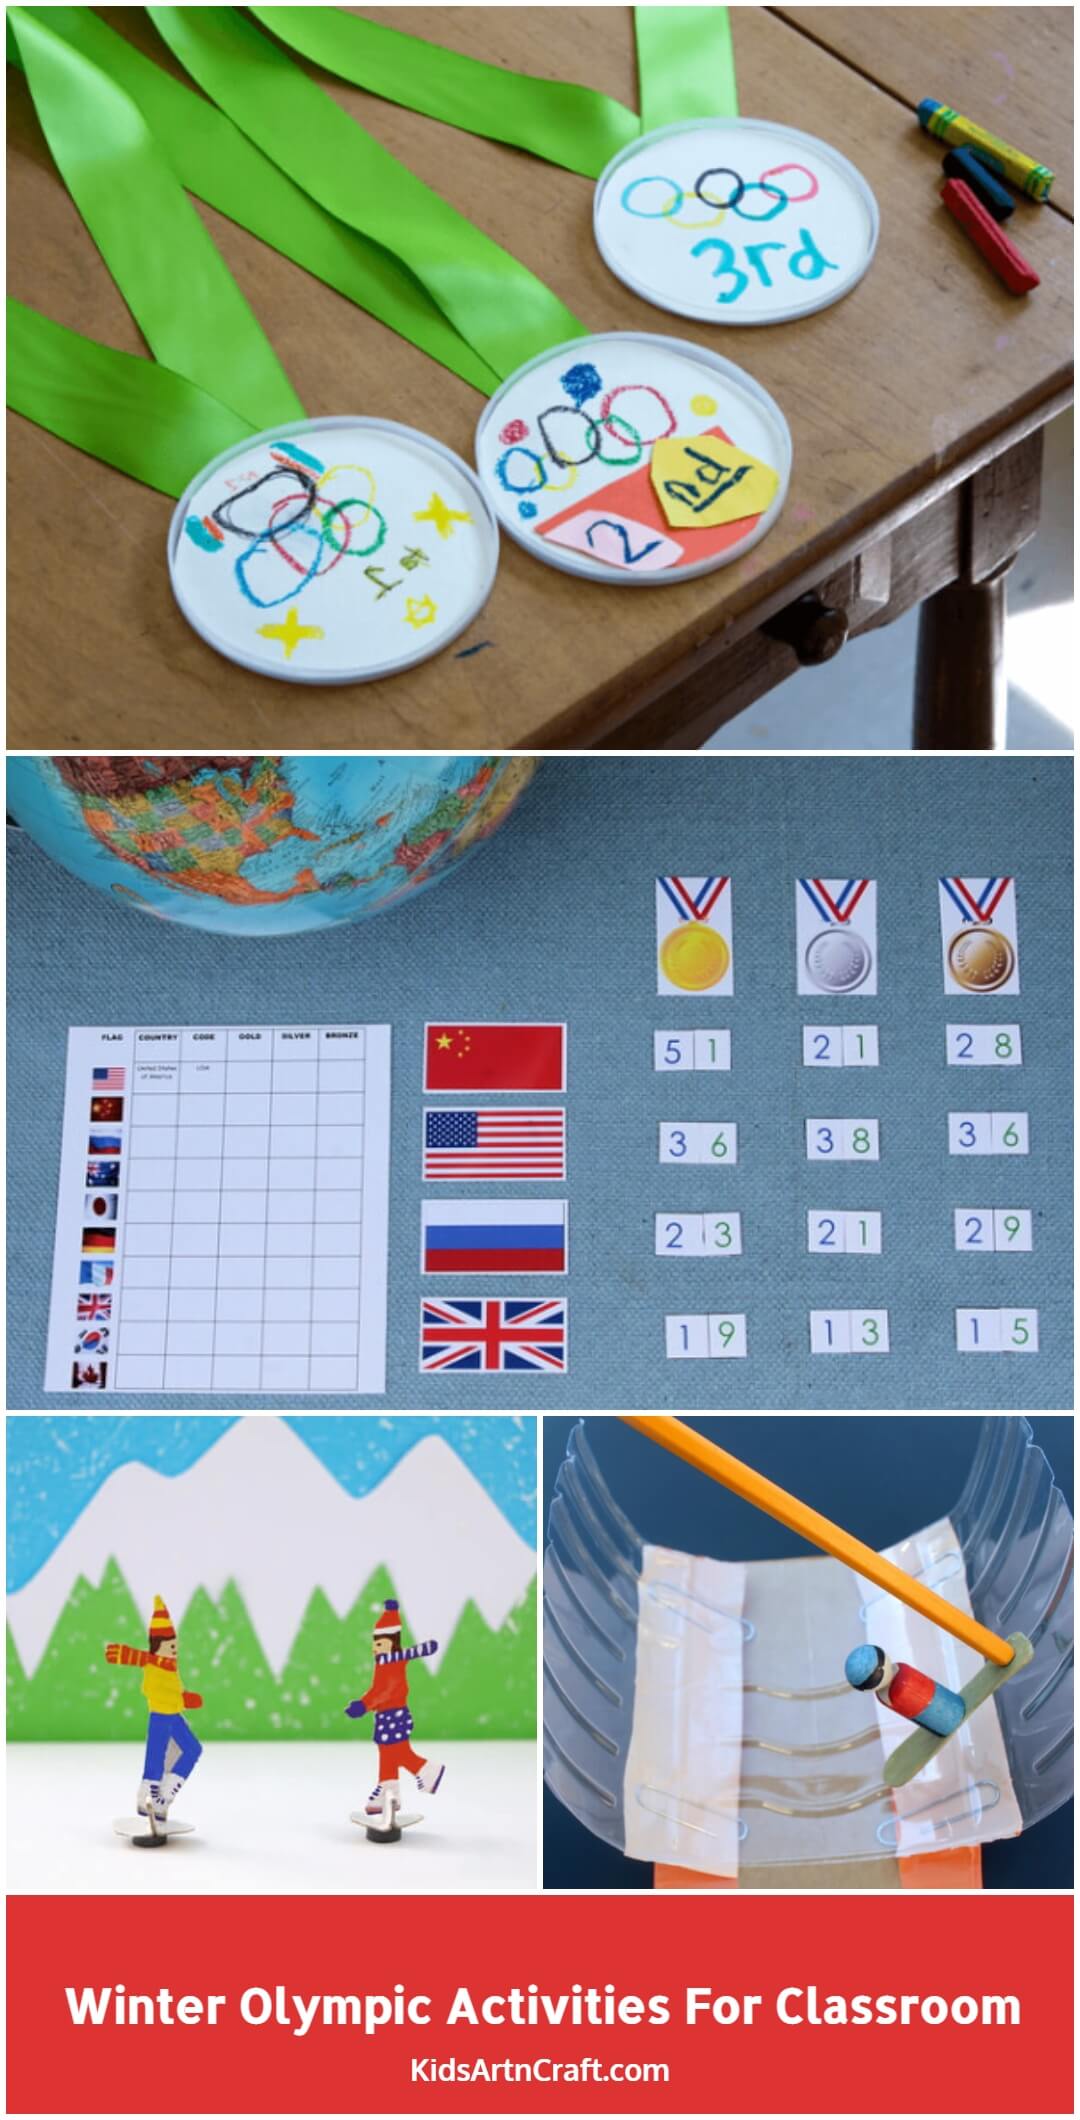 Winter Olympic Activities For Classroom